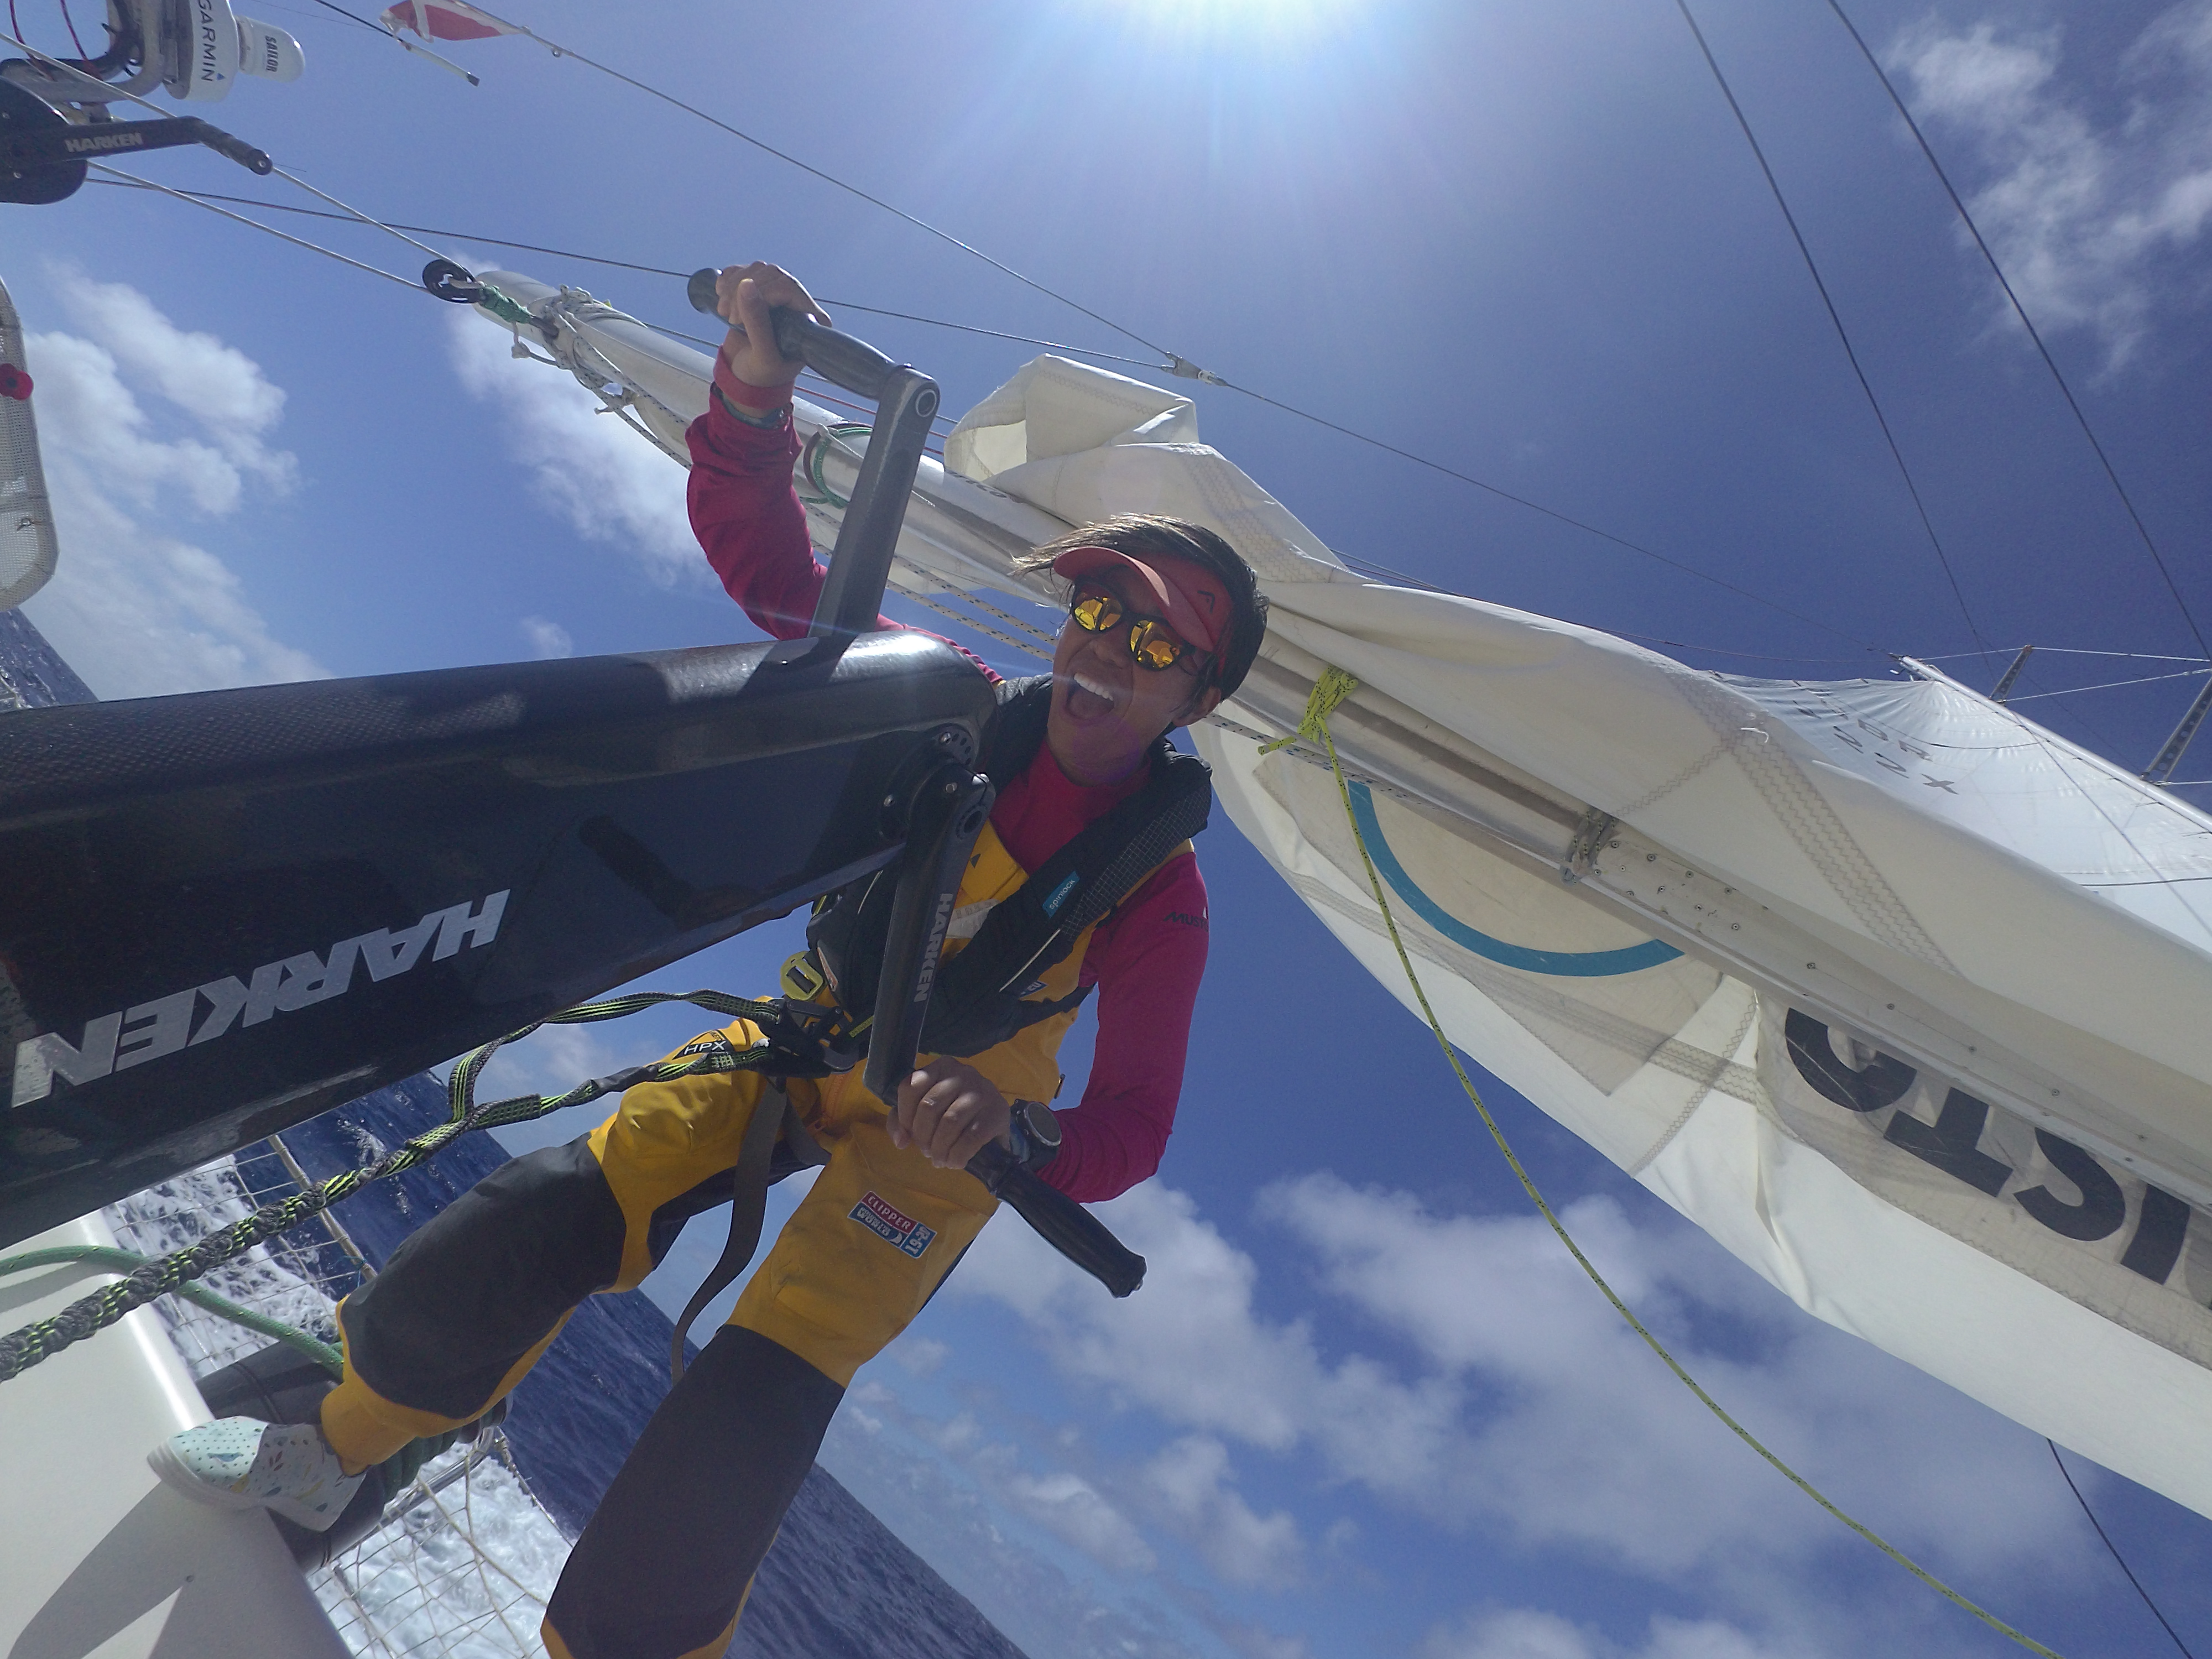 Queenie Wang hadn't sailed before signing up to the Clipper Race